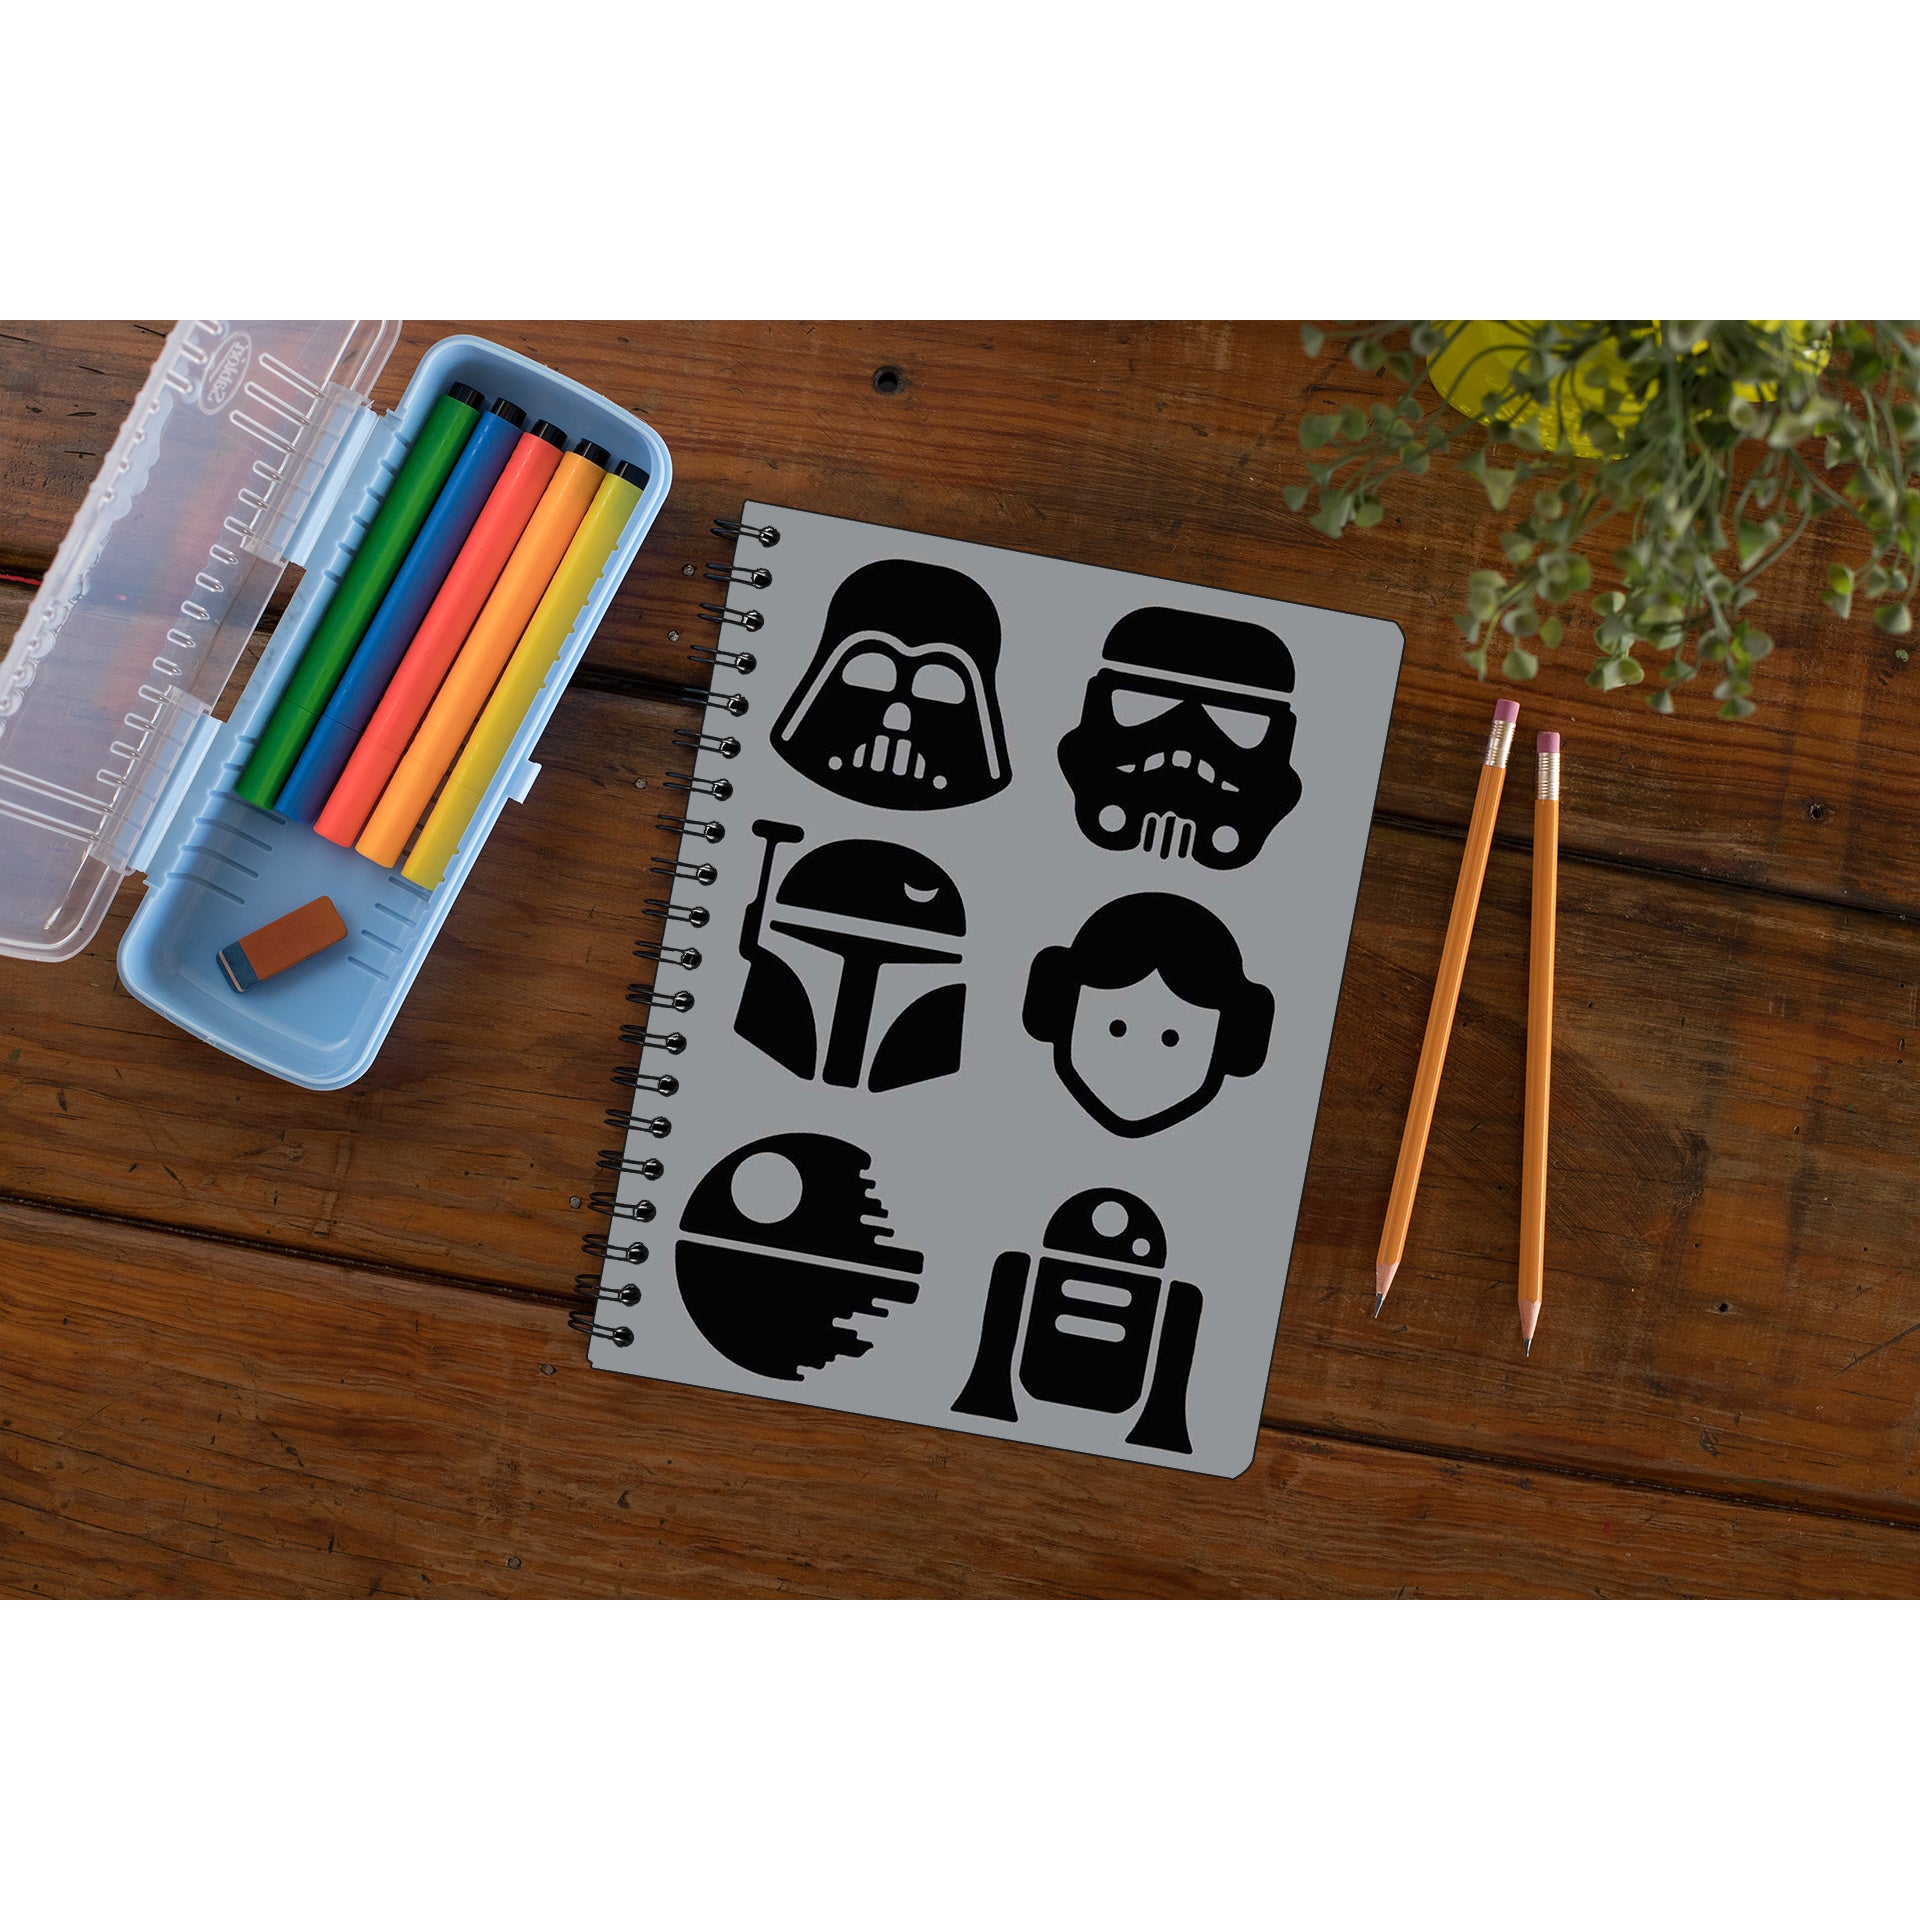 star wars star cast notebook notepad diary buy online india the banyan tee tbt unruled